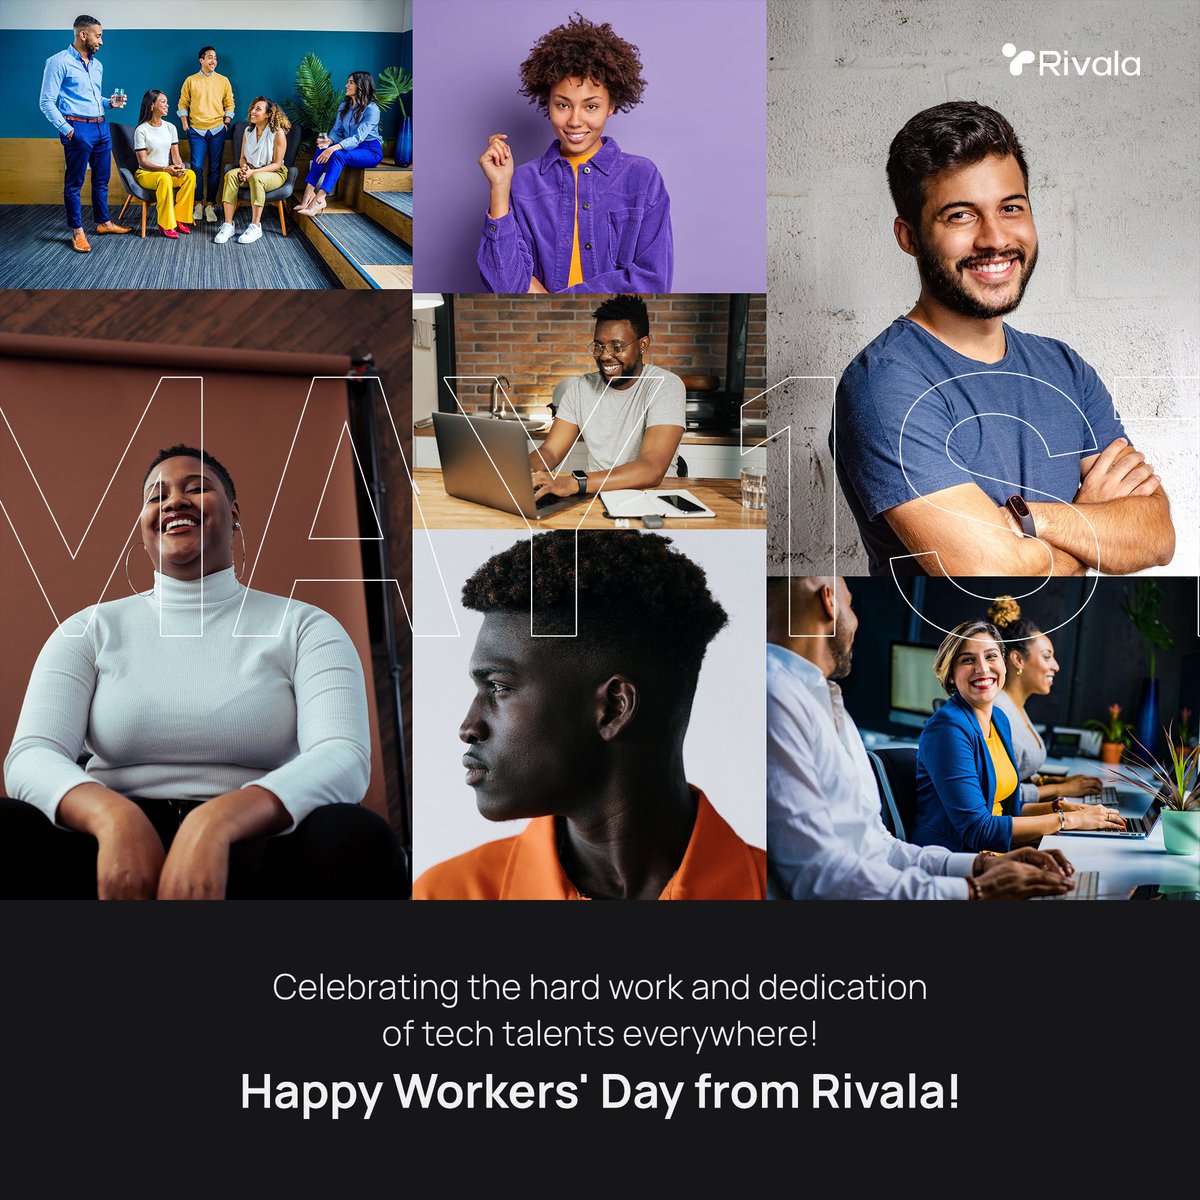 Today, we raise a toast to the brilliant minds powering innovation worldwide. 

Your dedication fuels progress, and we’re proud to stand with you. 

Happy Workers’ Day! 

#TechTalent #WorkersDay #Rivala